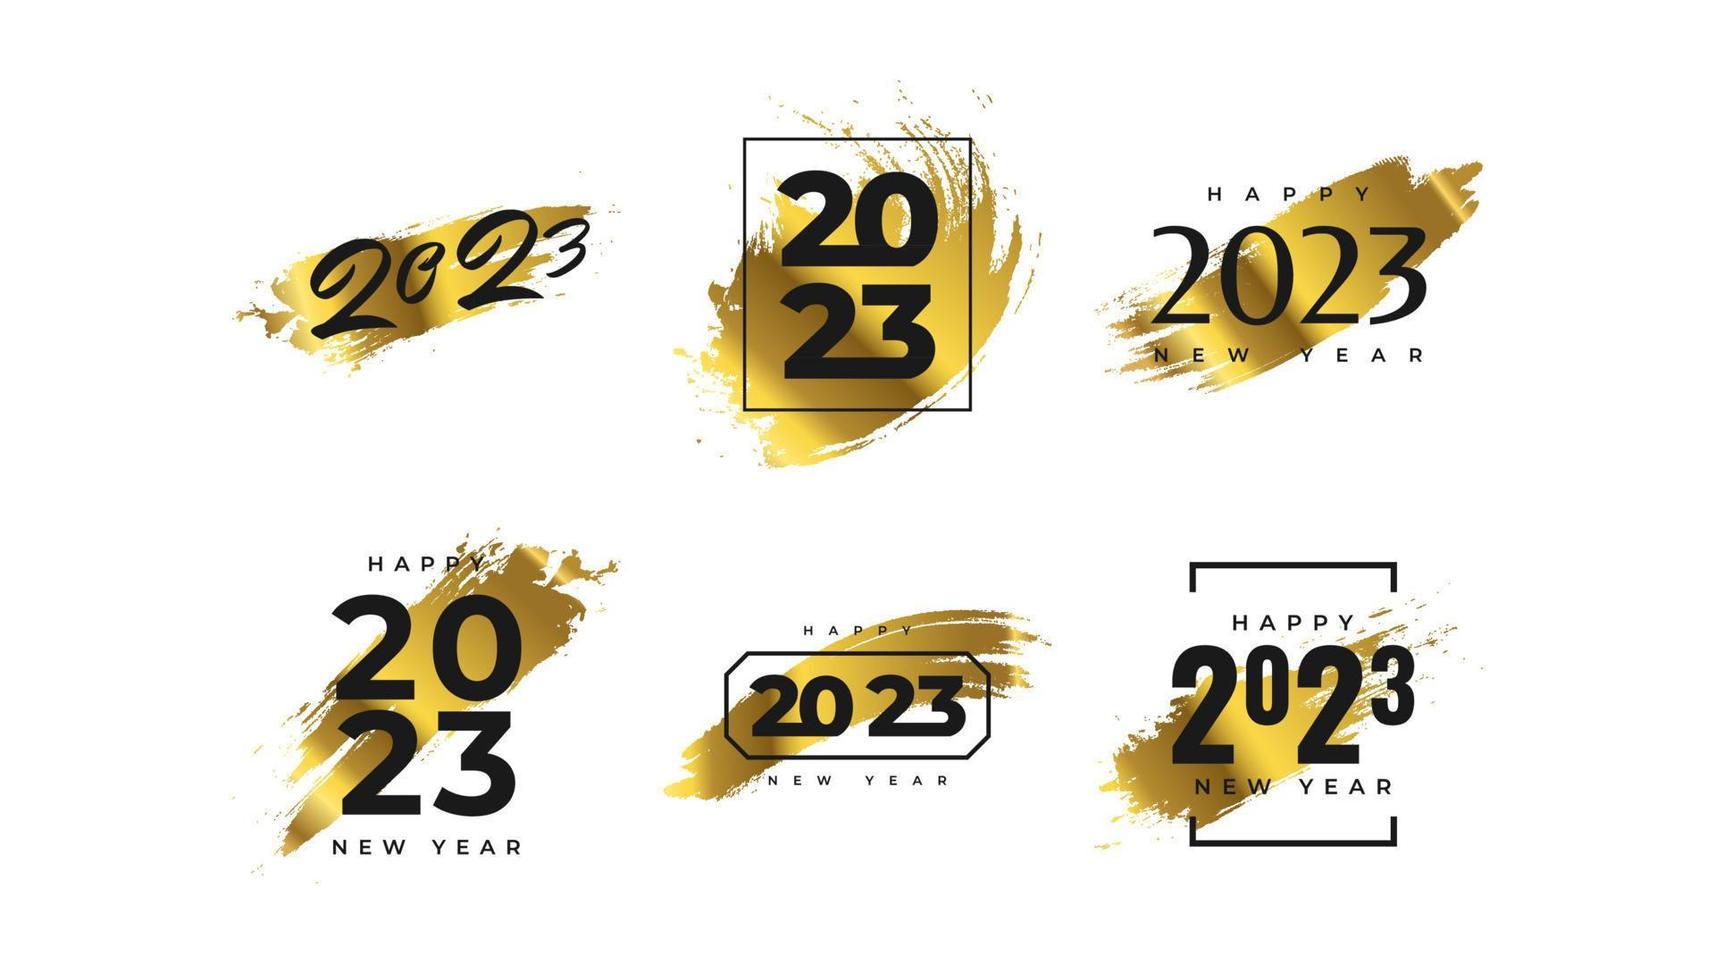 Set of 2023 Happy New Year Logo Text Design with Golden Brush. 2023 Happy New Year Symbol Isolated on White Background. Usable for Label, Calendar Design or Celebration Card vector